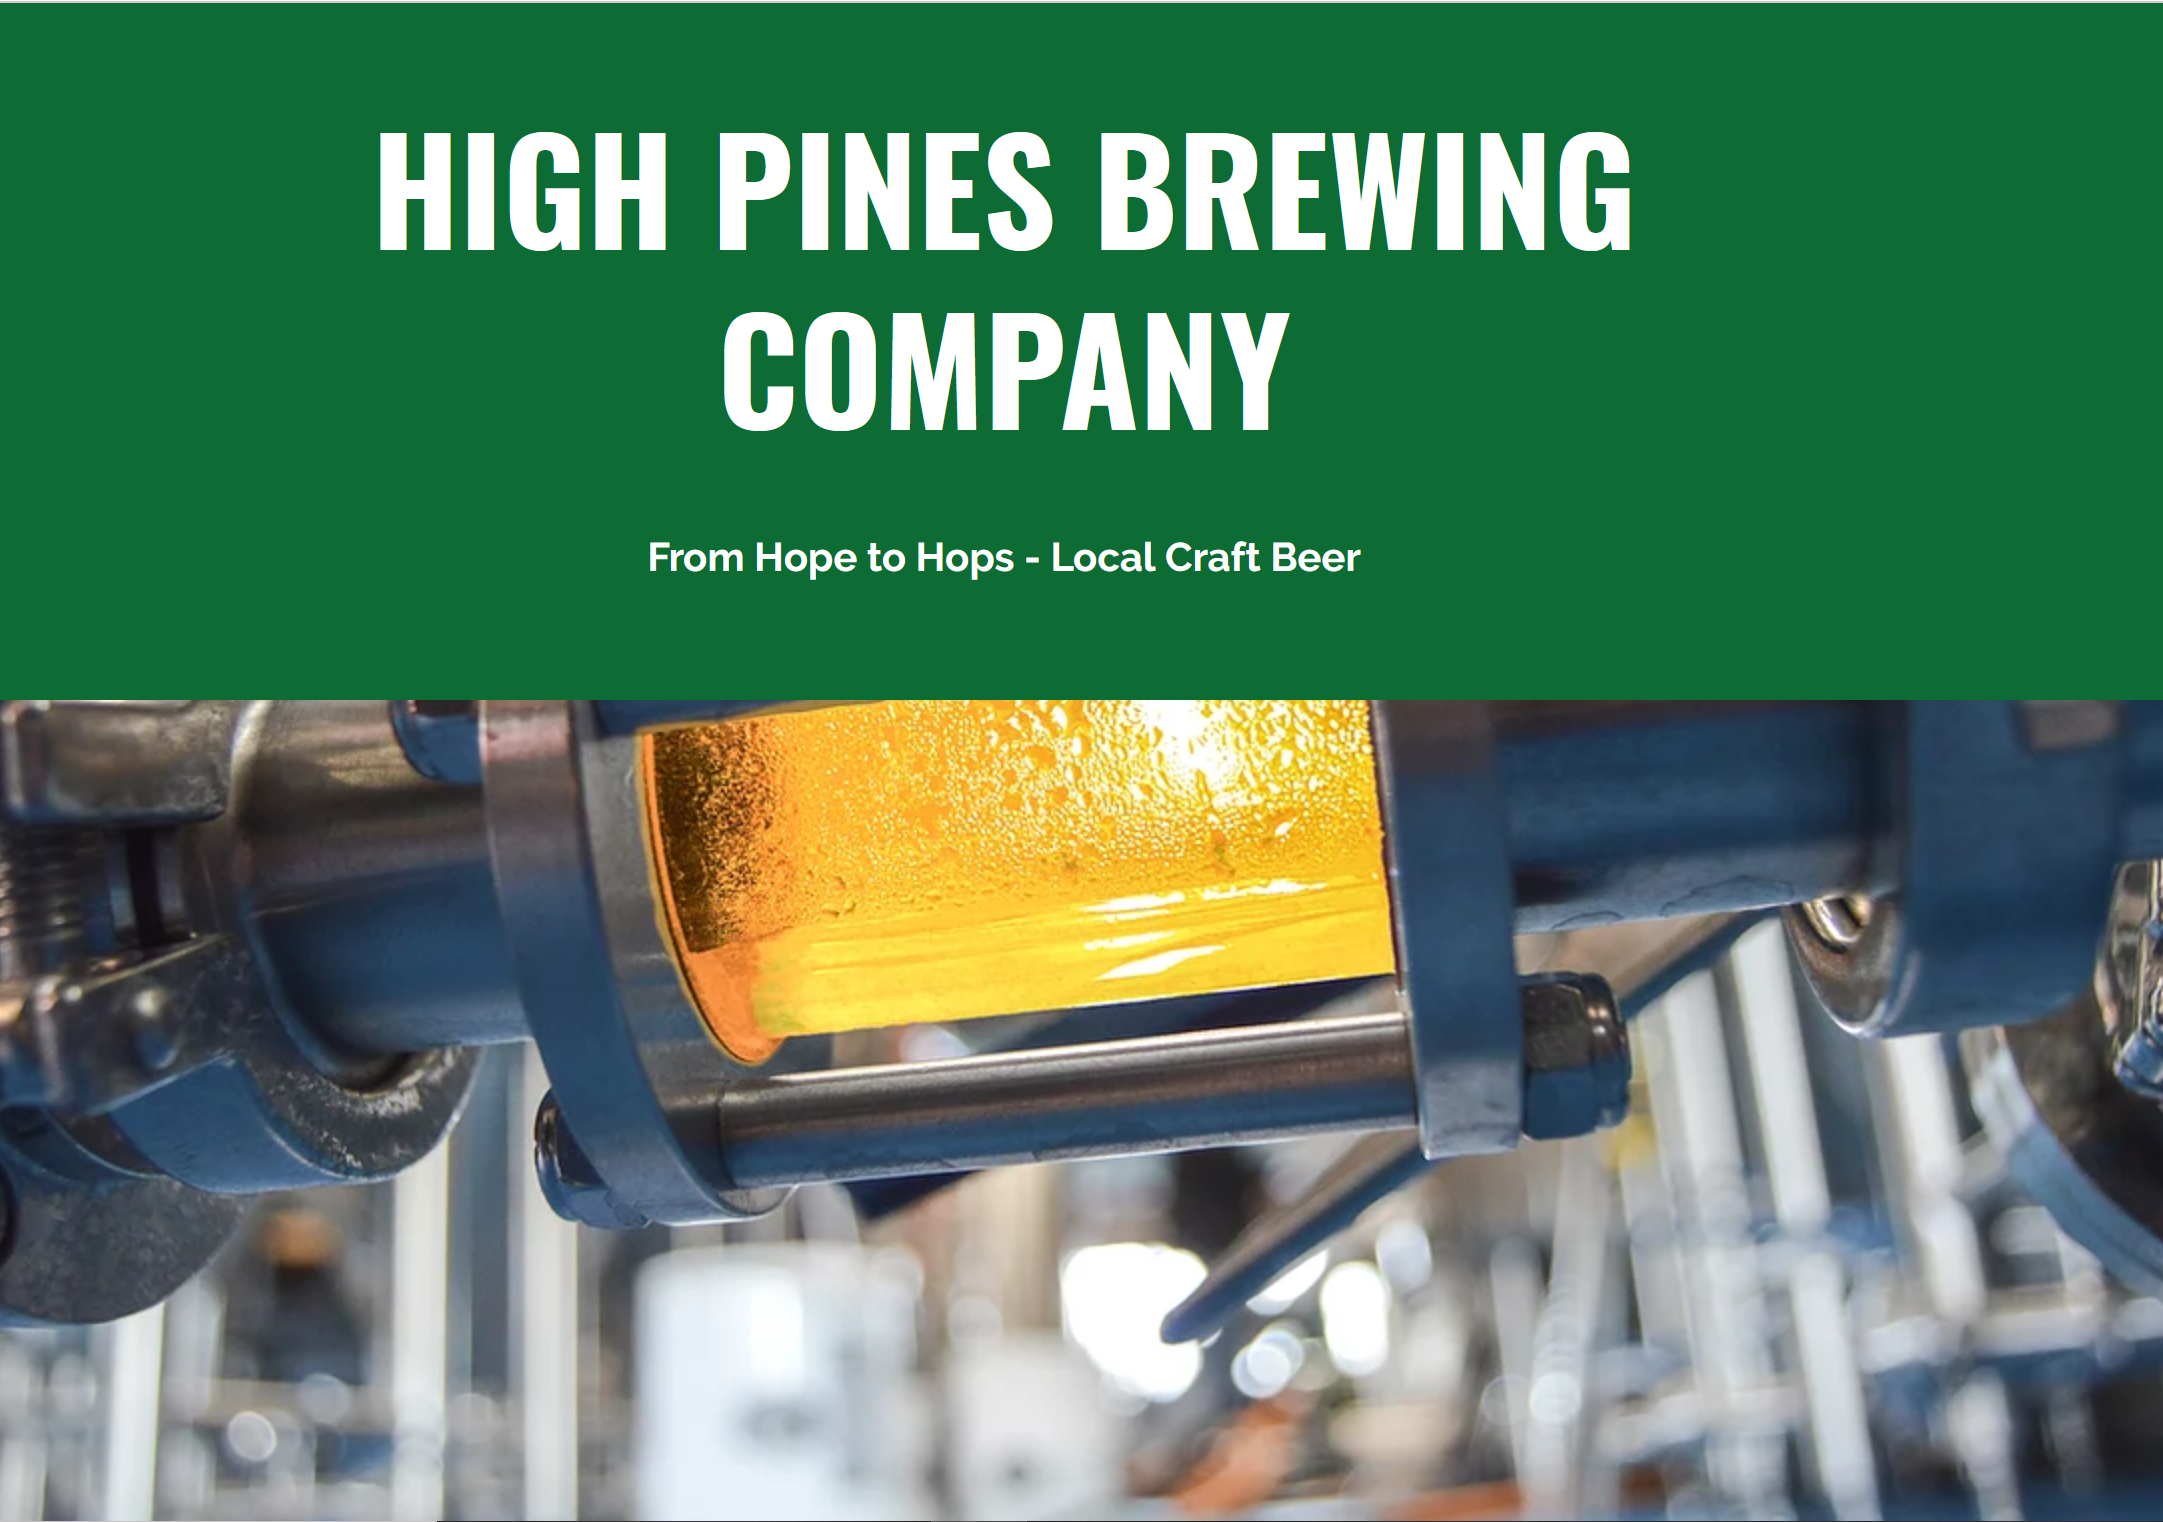 IFMA MSP Winter Social @ High Pines Brewing Company | Roseville | Minnesota | United States